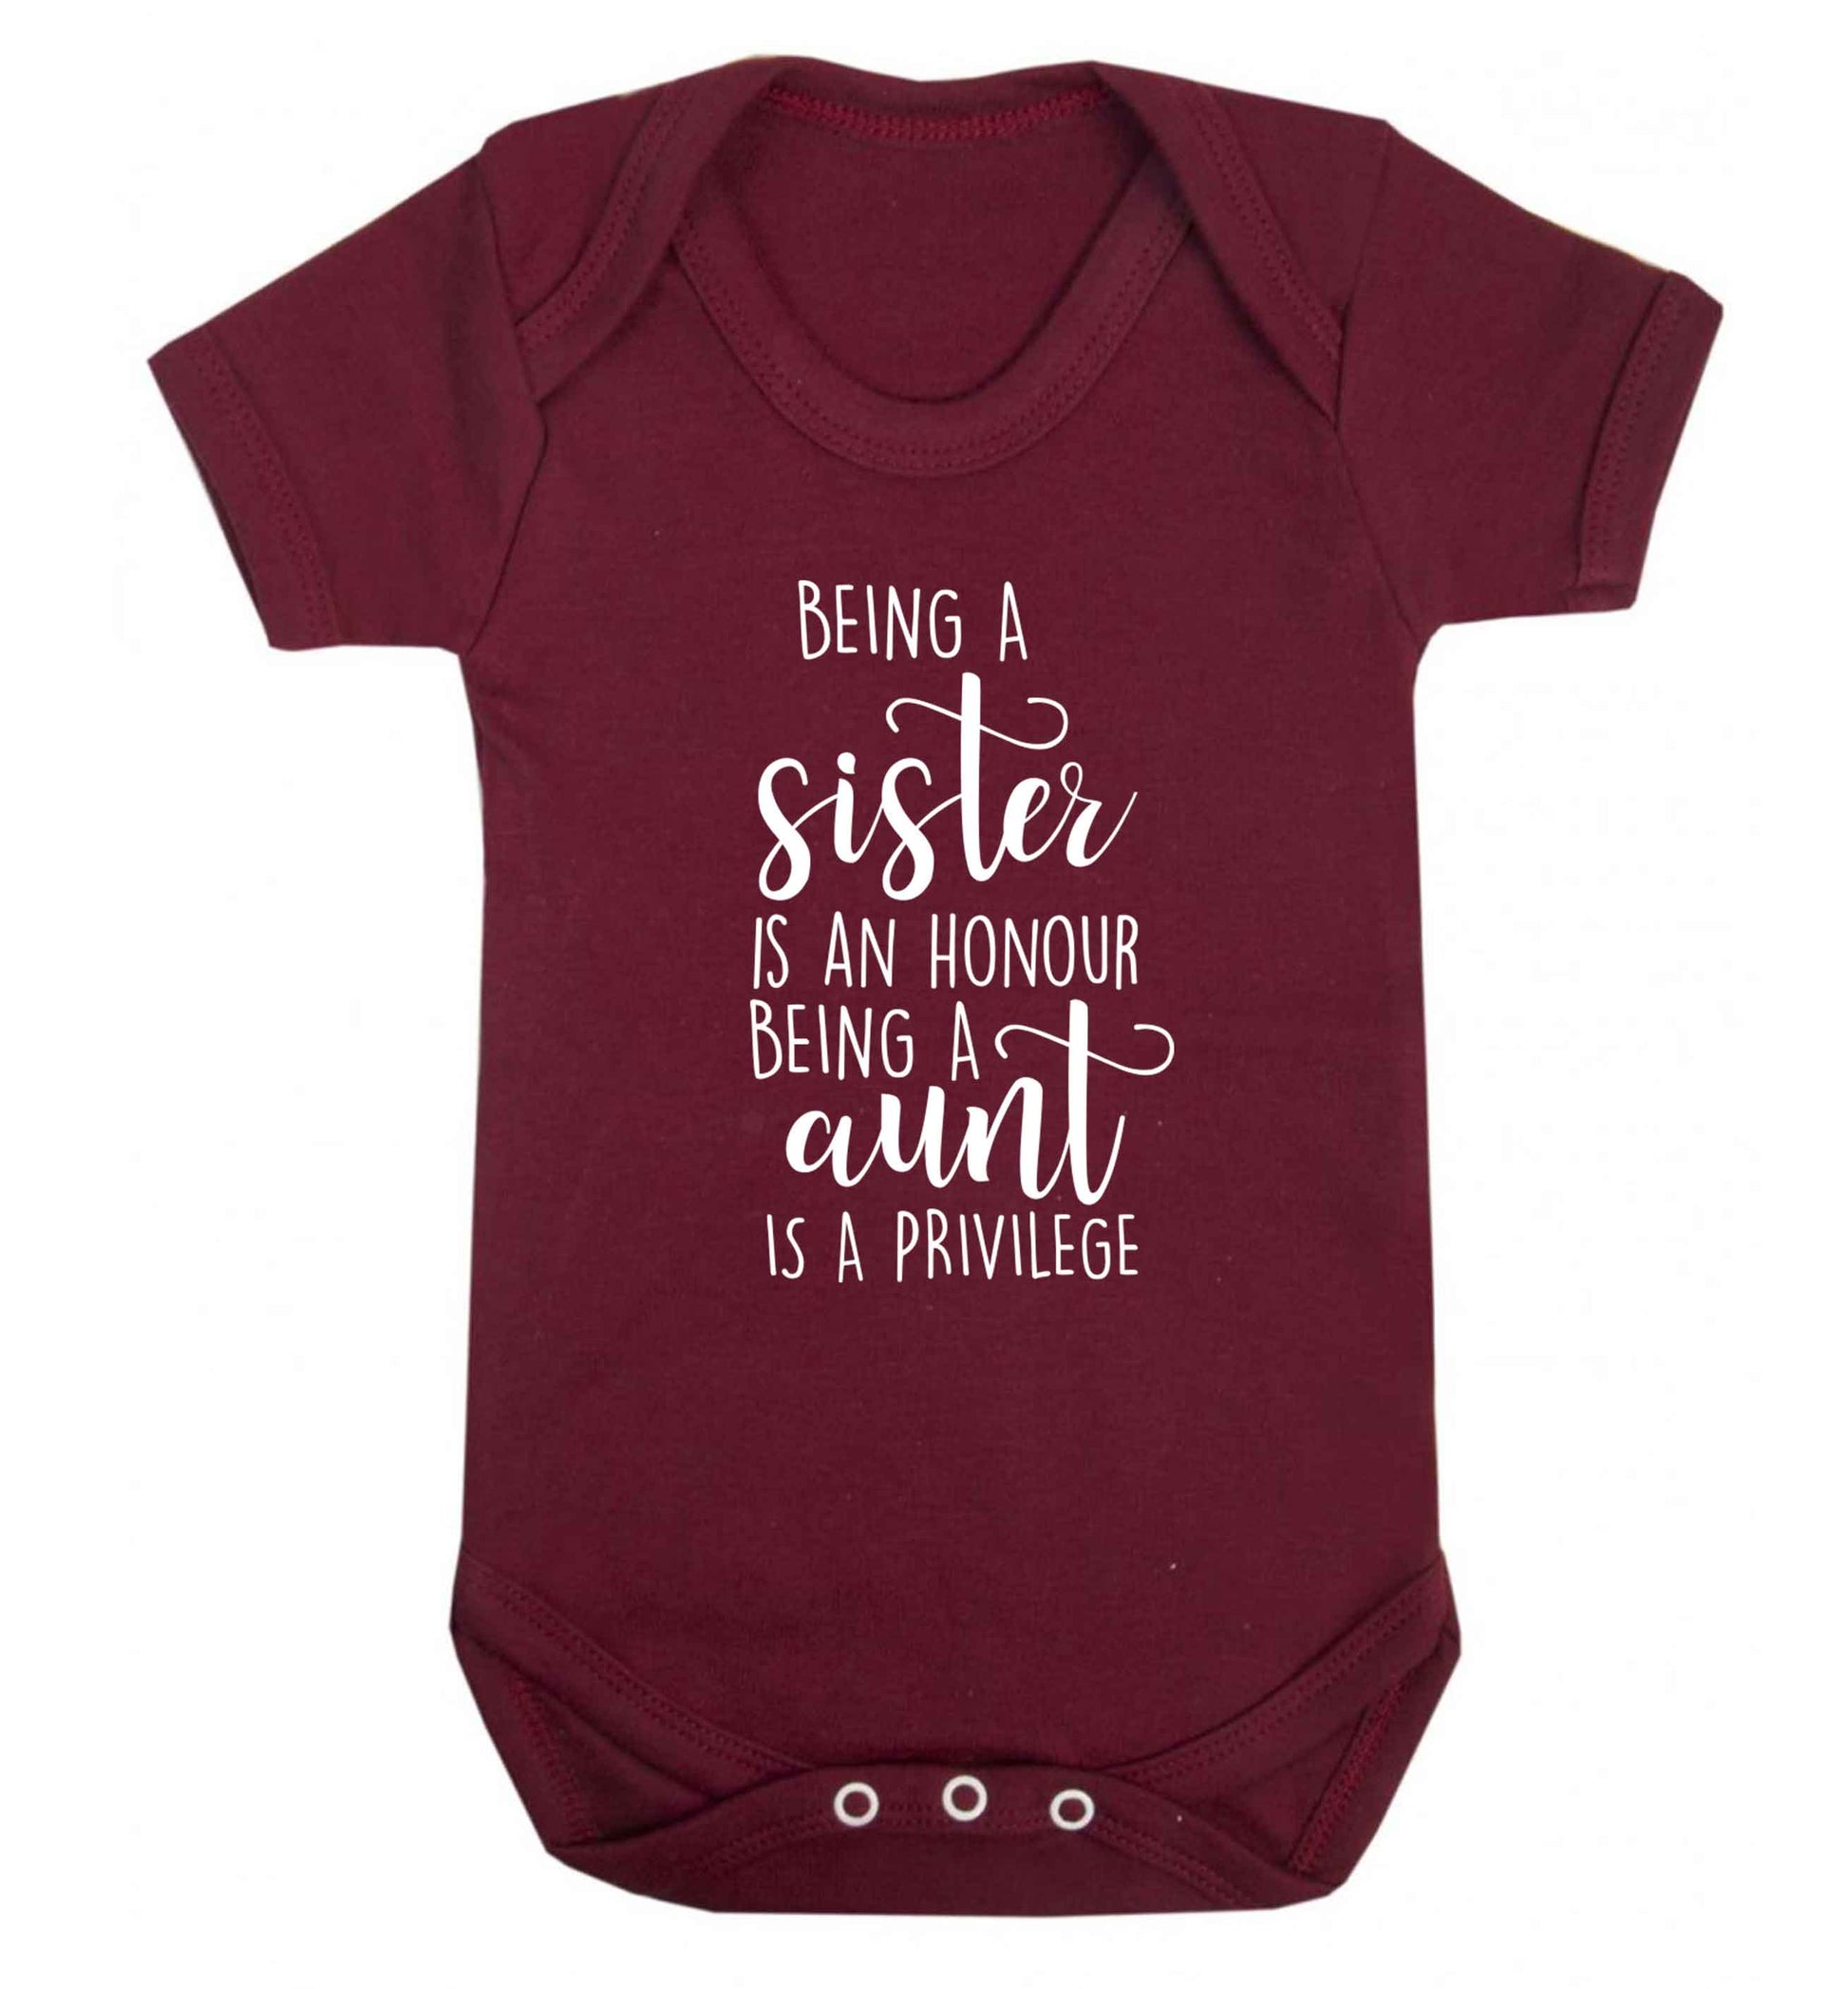 Being a sister is an honour being an auntie is a privilege Baby Vest maroon 18-24 months